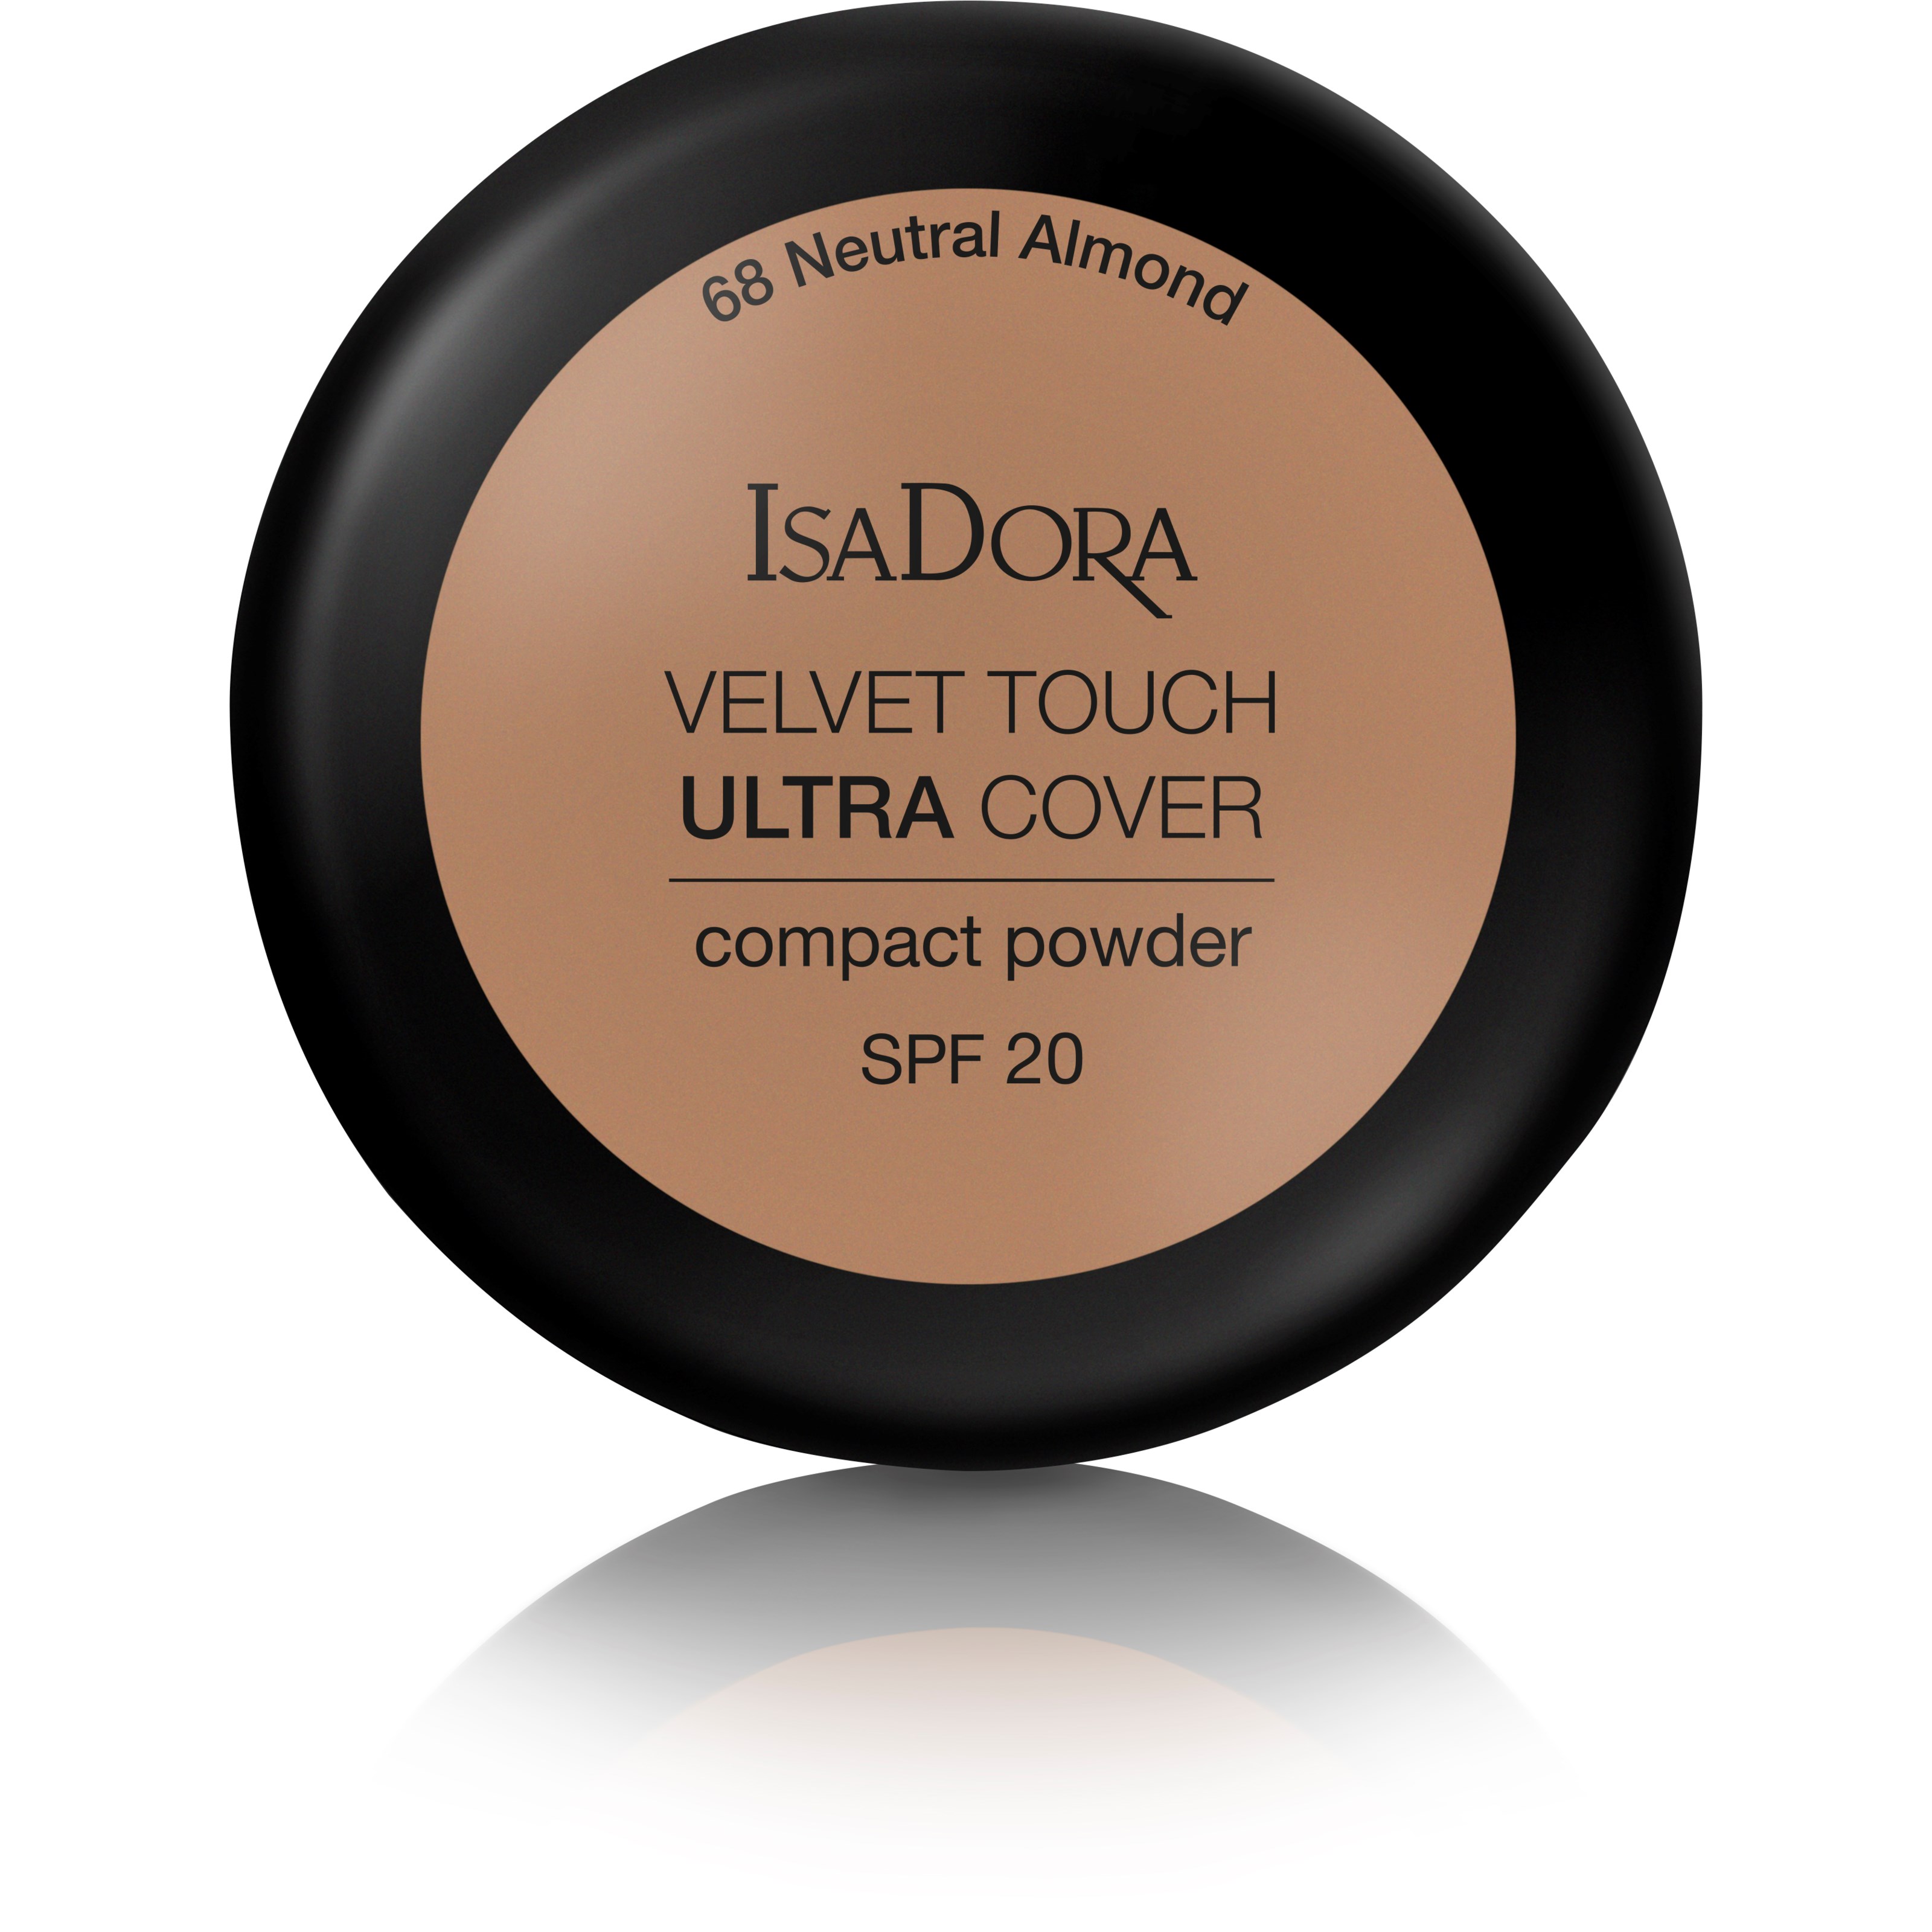 IsaDora Velvet Touch Ultra Cover Compact Power Spf 20 68 Neutral Almo